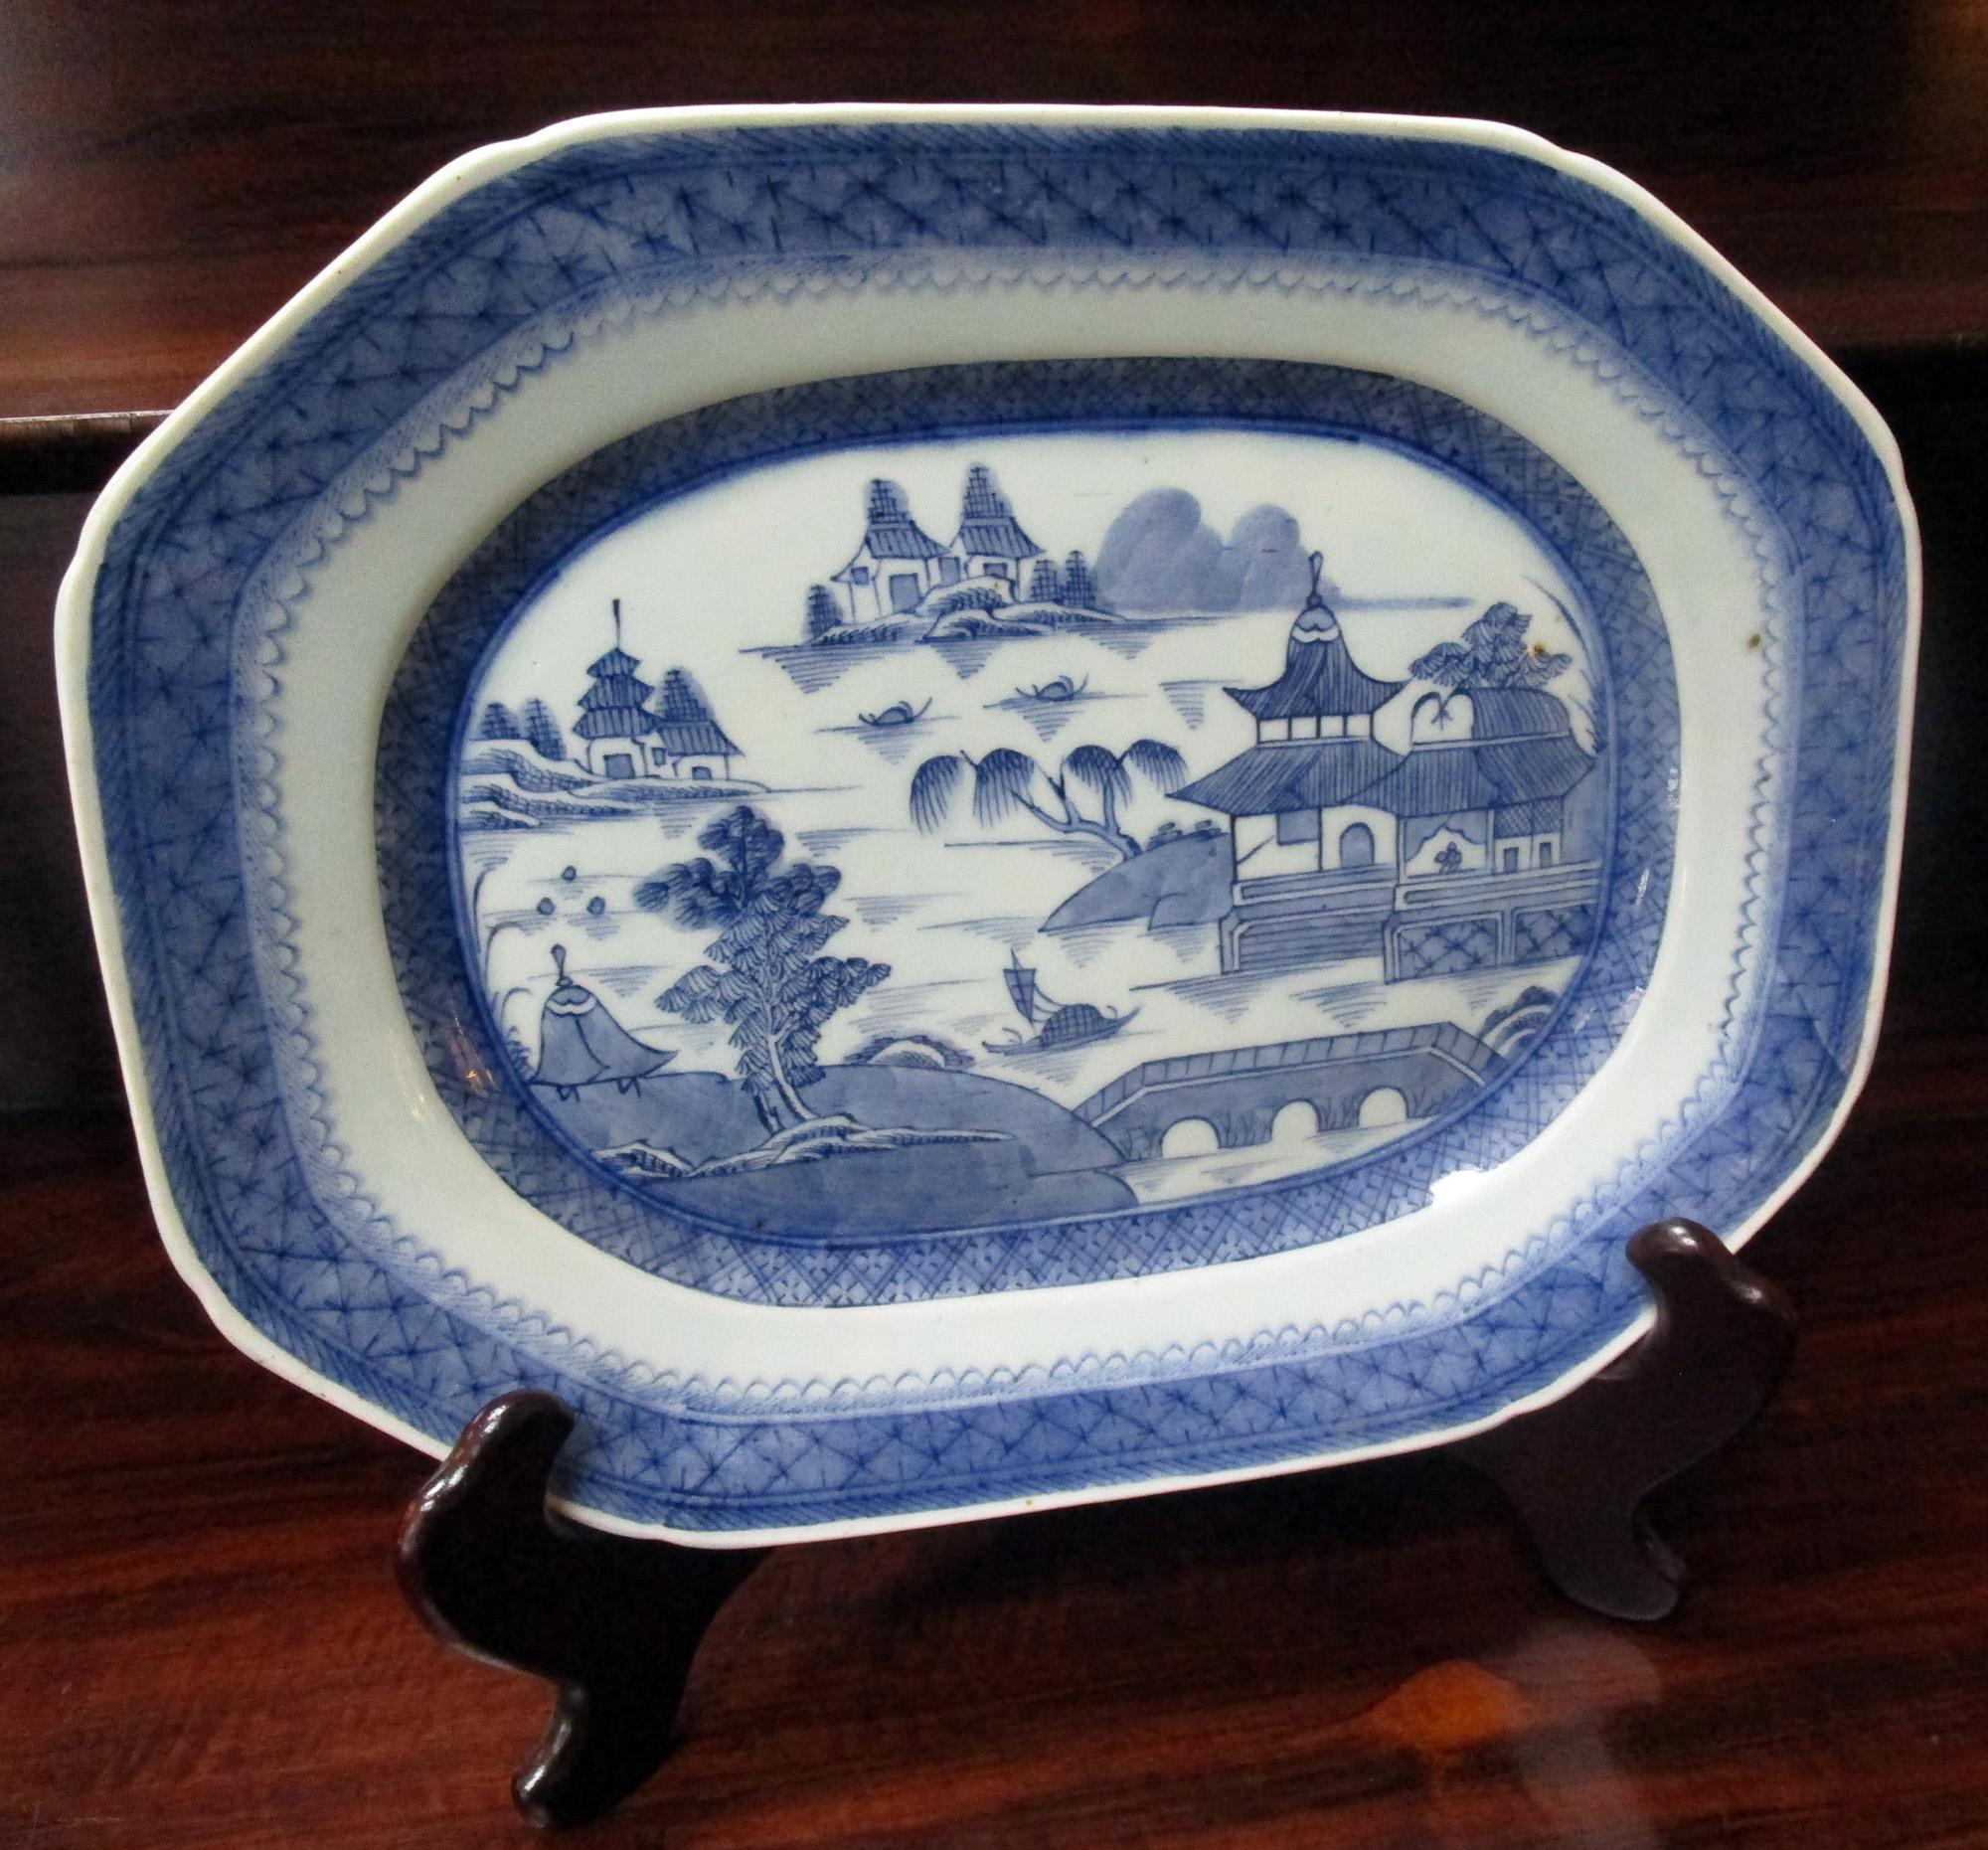 Antique 19th century canton octagonal shaped platter decorated in an under-glazed blue with a traditional Chinese hand decoration set against a white porcelain background. The bottom rim of the platter is unglazed. Good condition with some residue